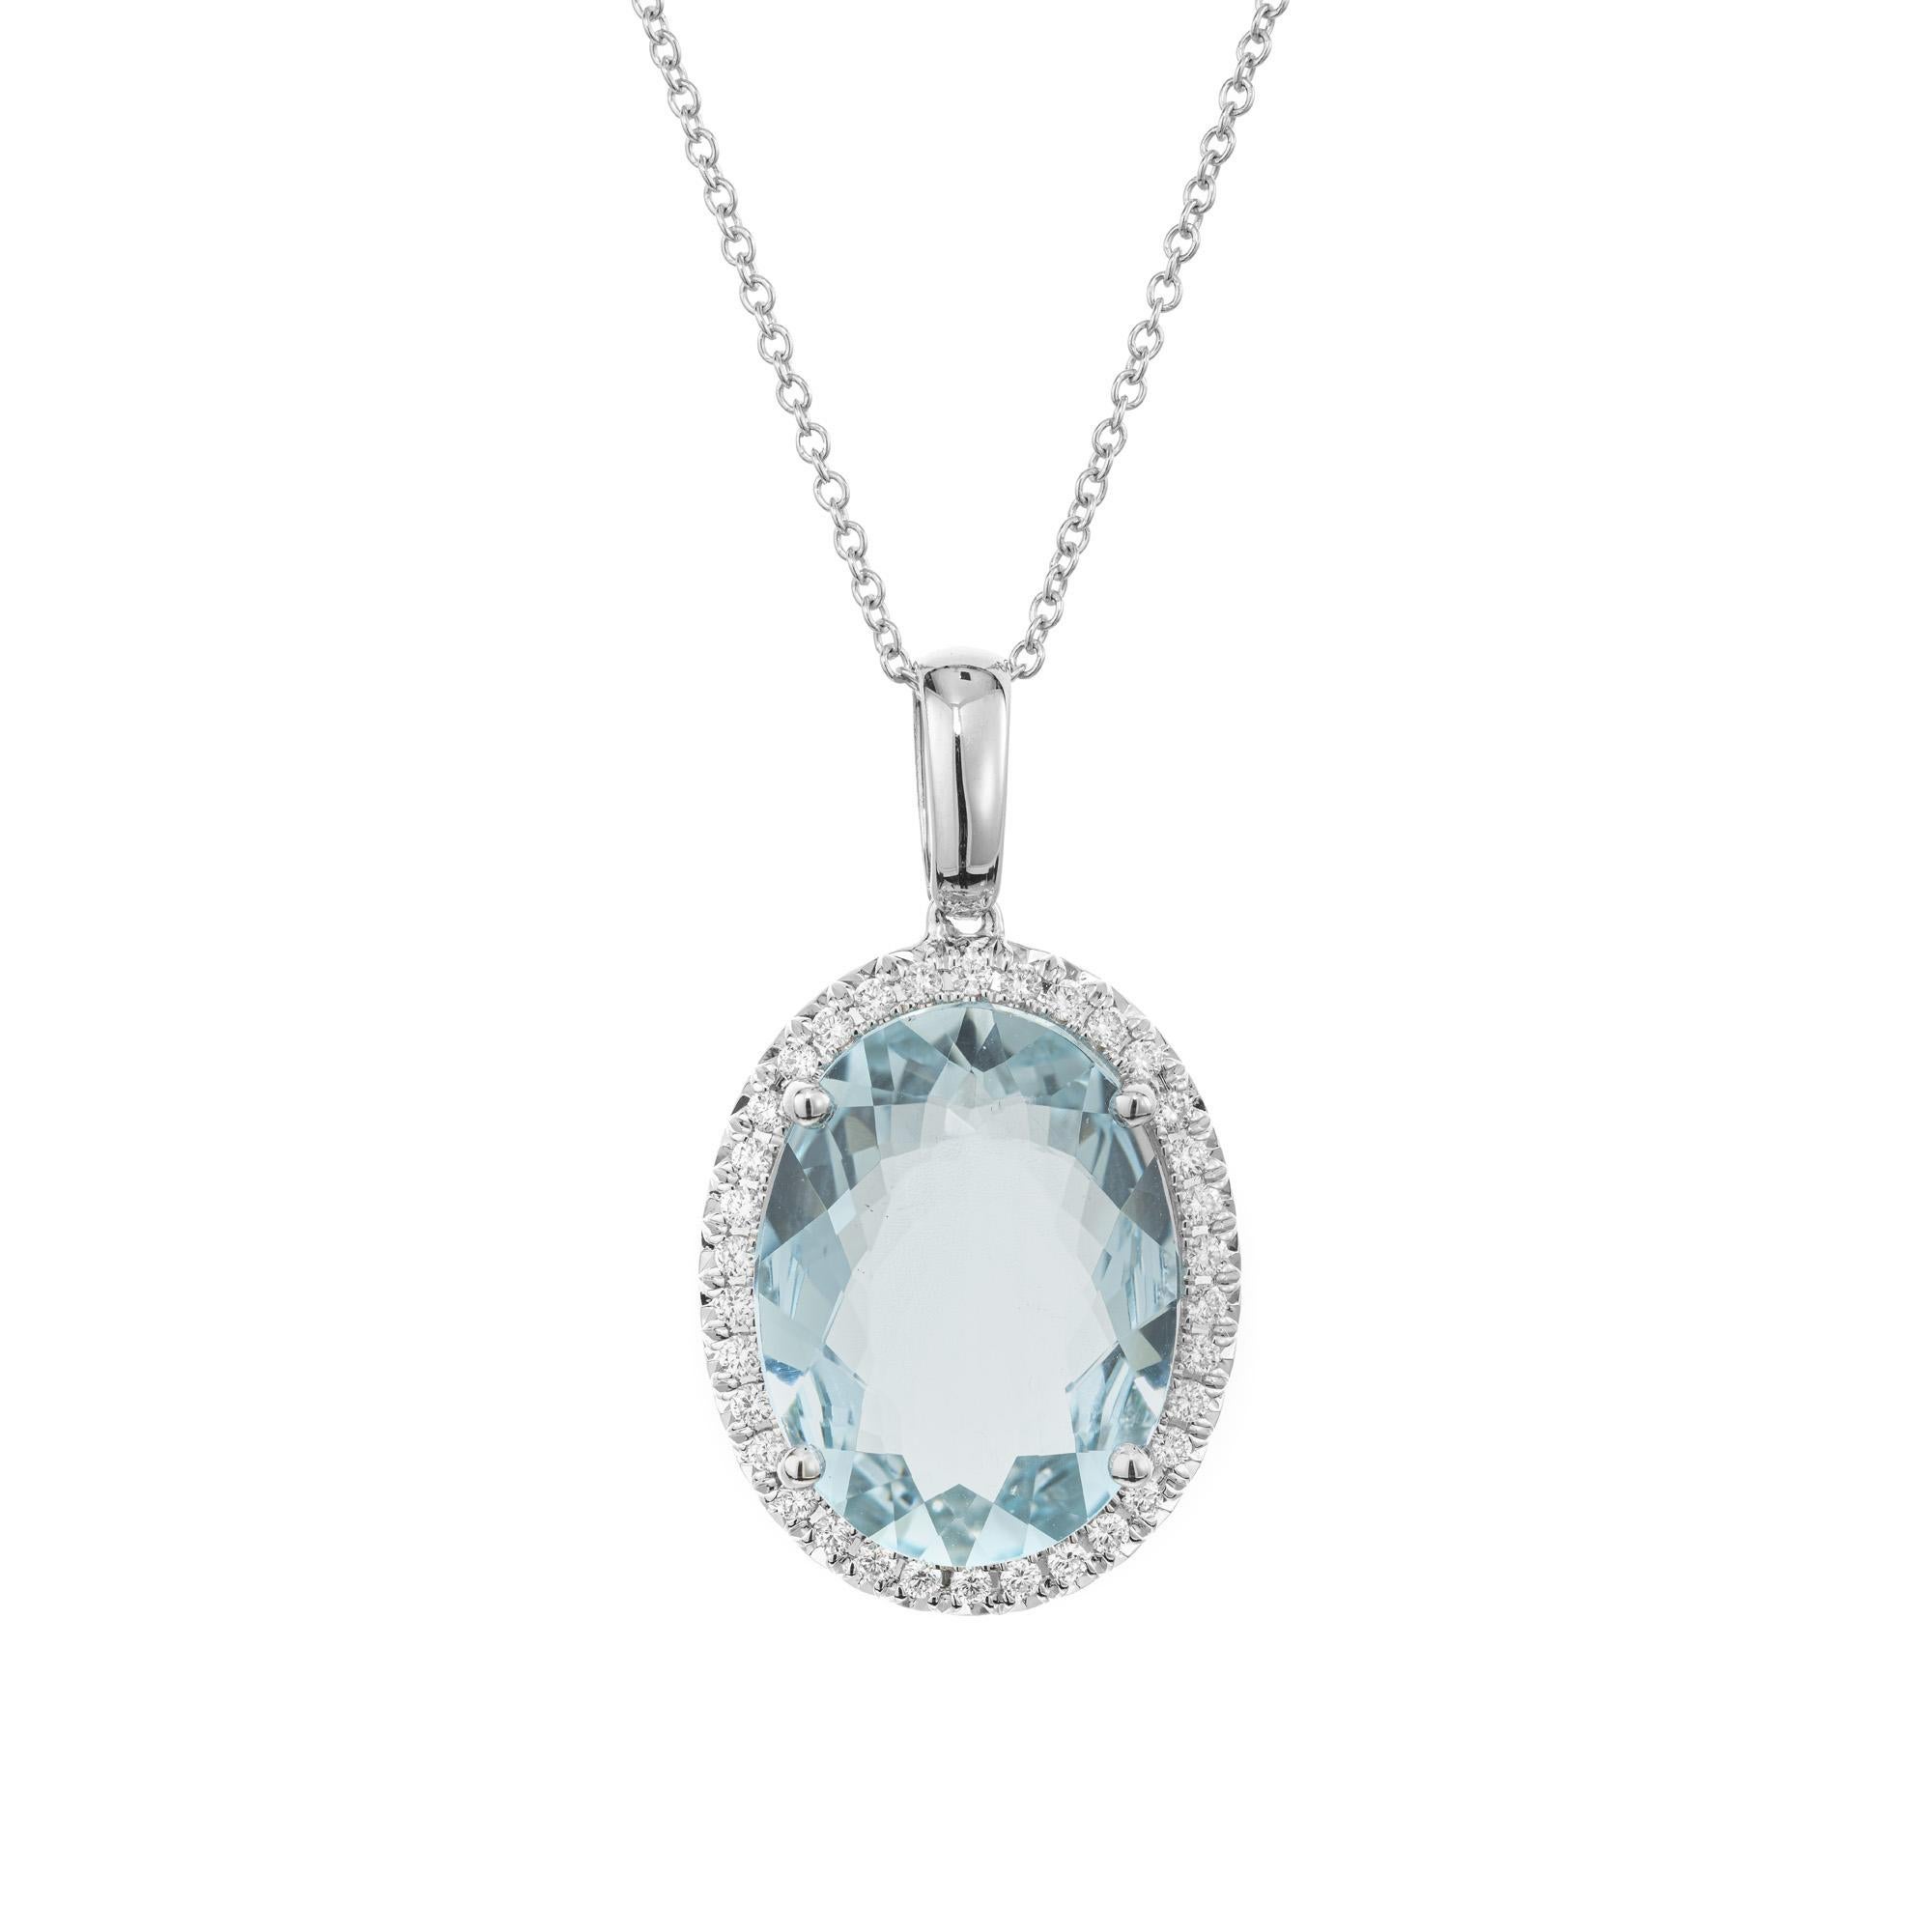 Stunning Aqua and diamond pendant necklace. This exquisite piece features a captivating 6.09ct oval aquamarine center gemstone complemented by dazzling halo of 34 round brilliant cut diamonds. The pendant is 14k white gold and completed with a 14k